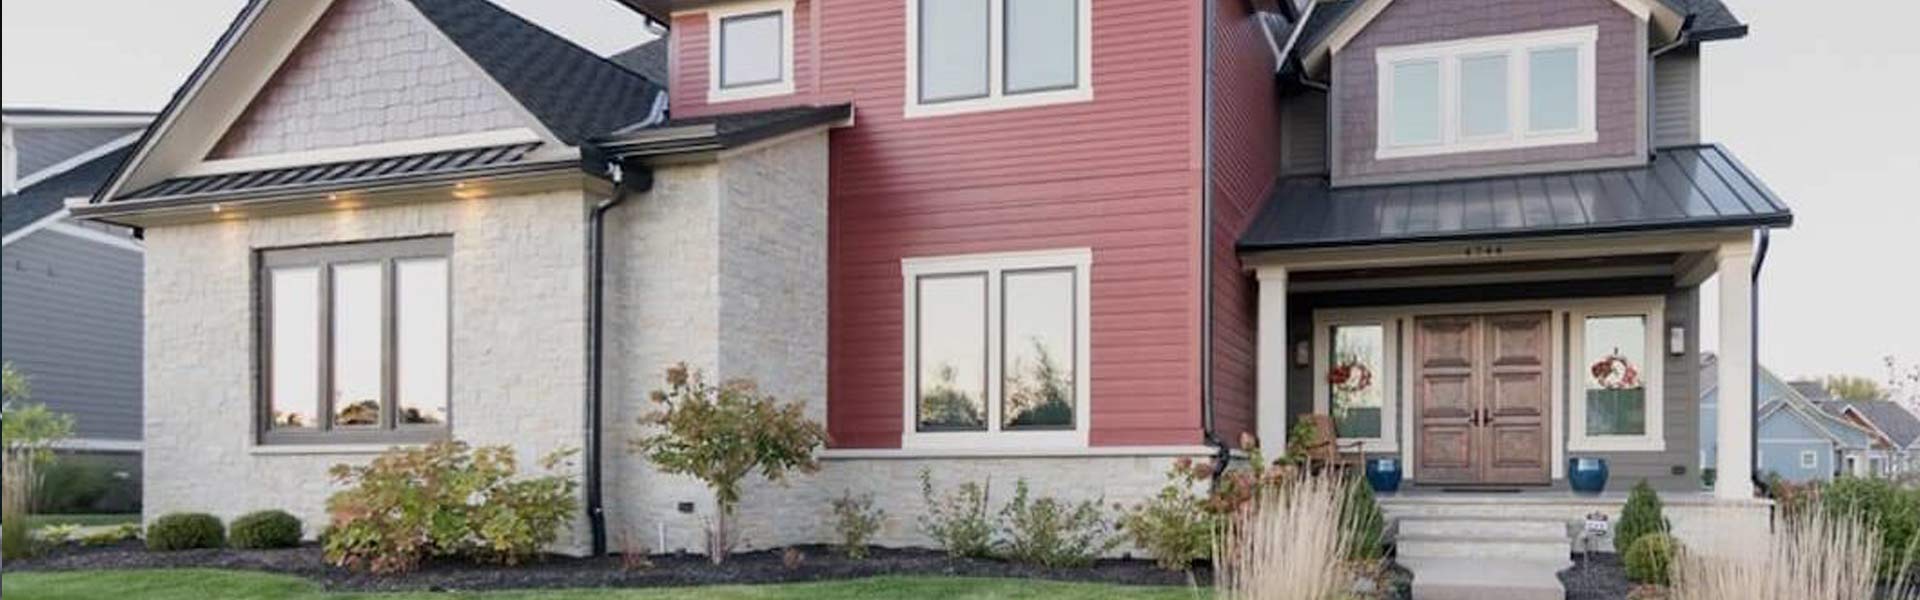 Choosing Exterior Paint Colors Tips for Picking the